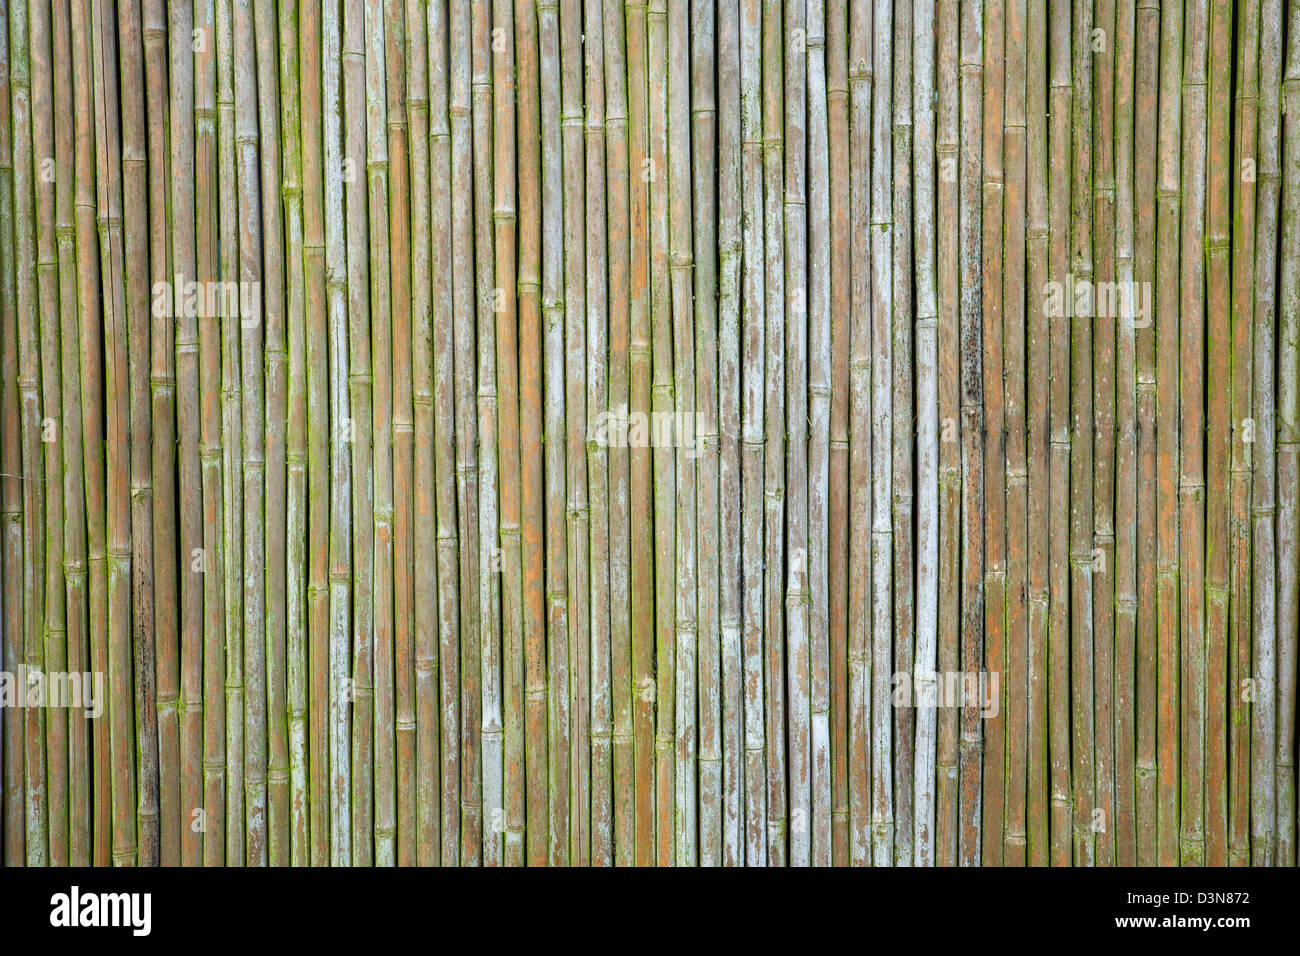 old weathered vertical bamboo wall or curtain Stock Photo